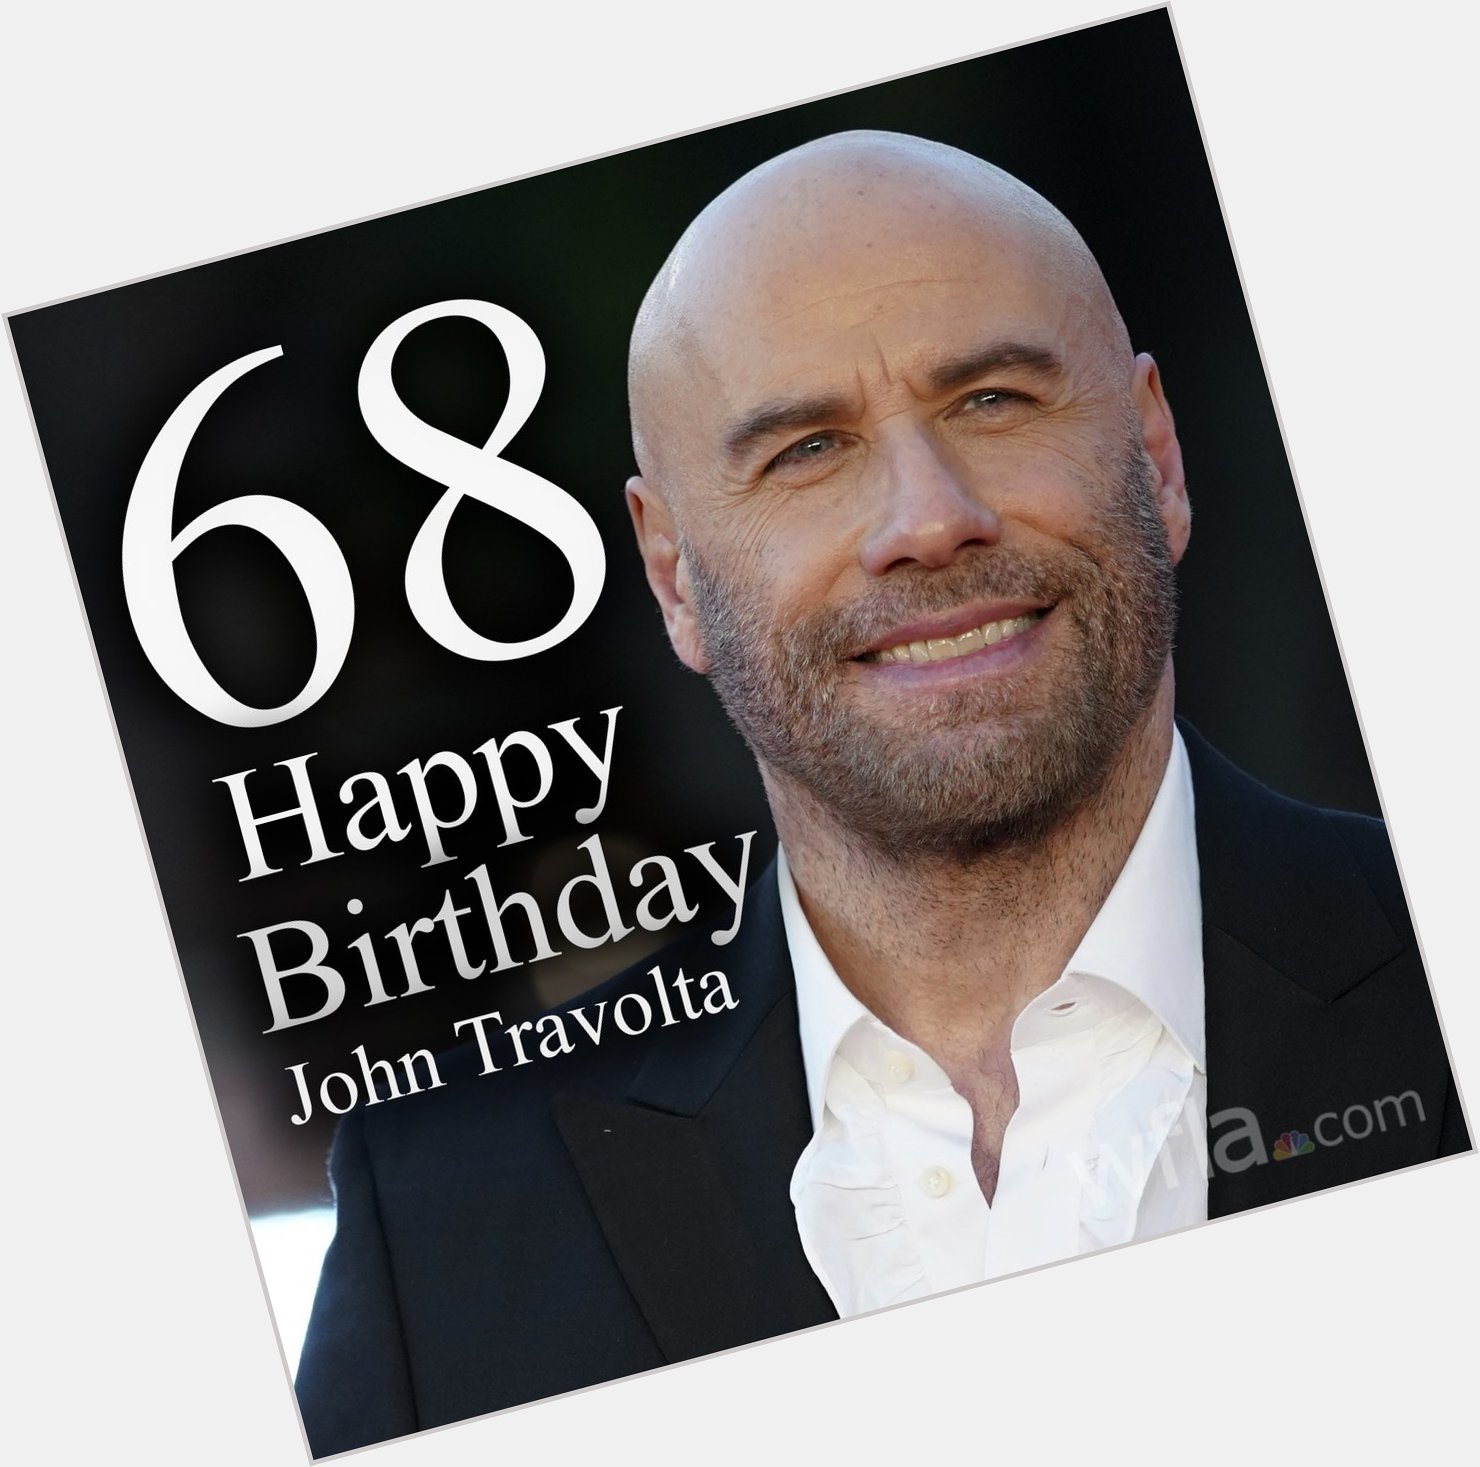 Join us in wishing a happy 68th birthday to actor John Travolta!  